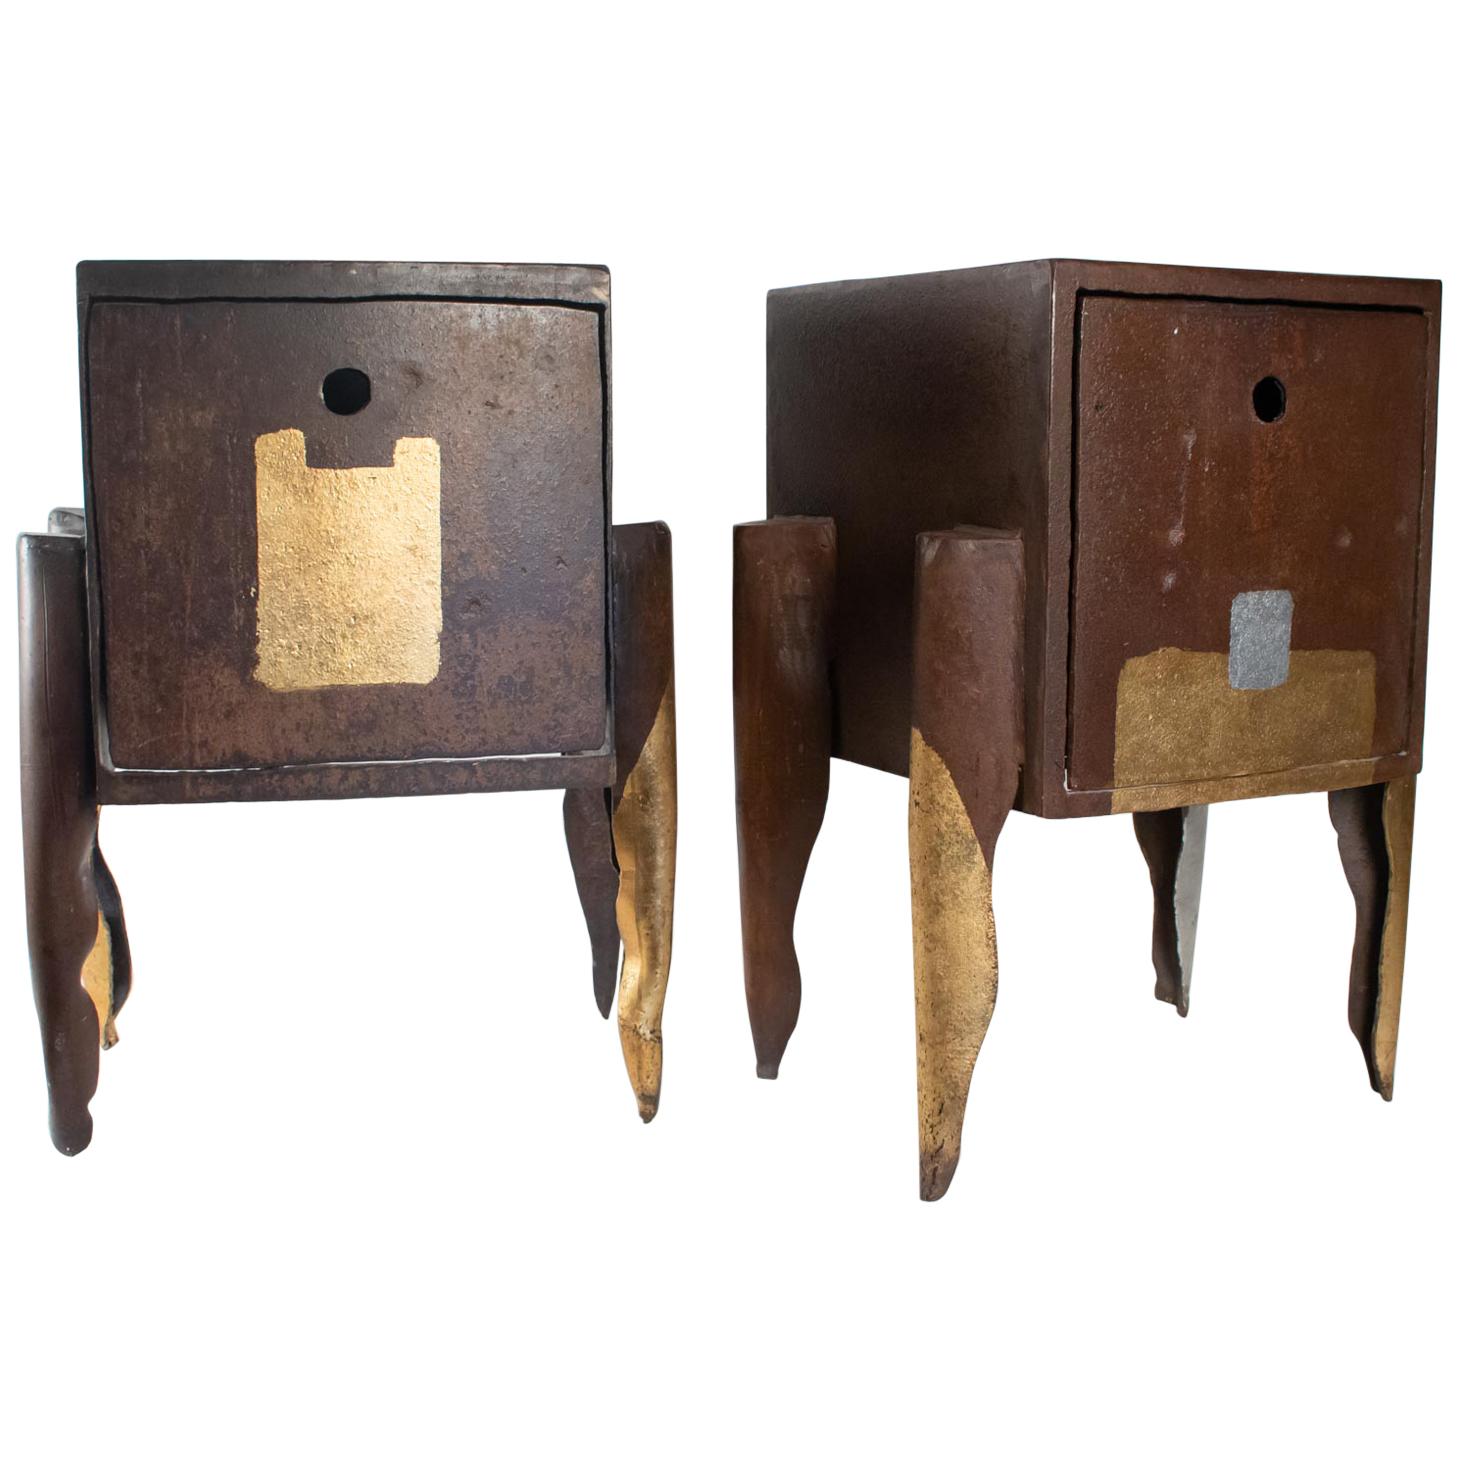 Pair of Table Bedside Artist Jean-Jacques Argueyrolles, 20th Century